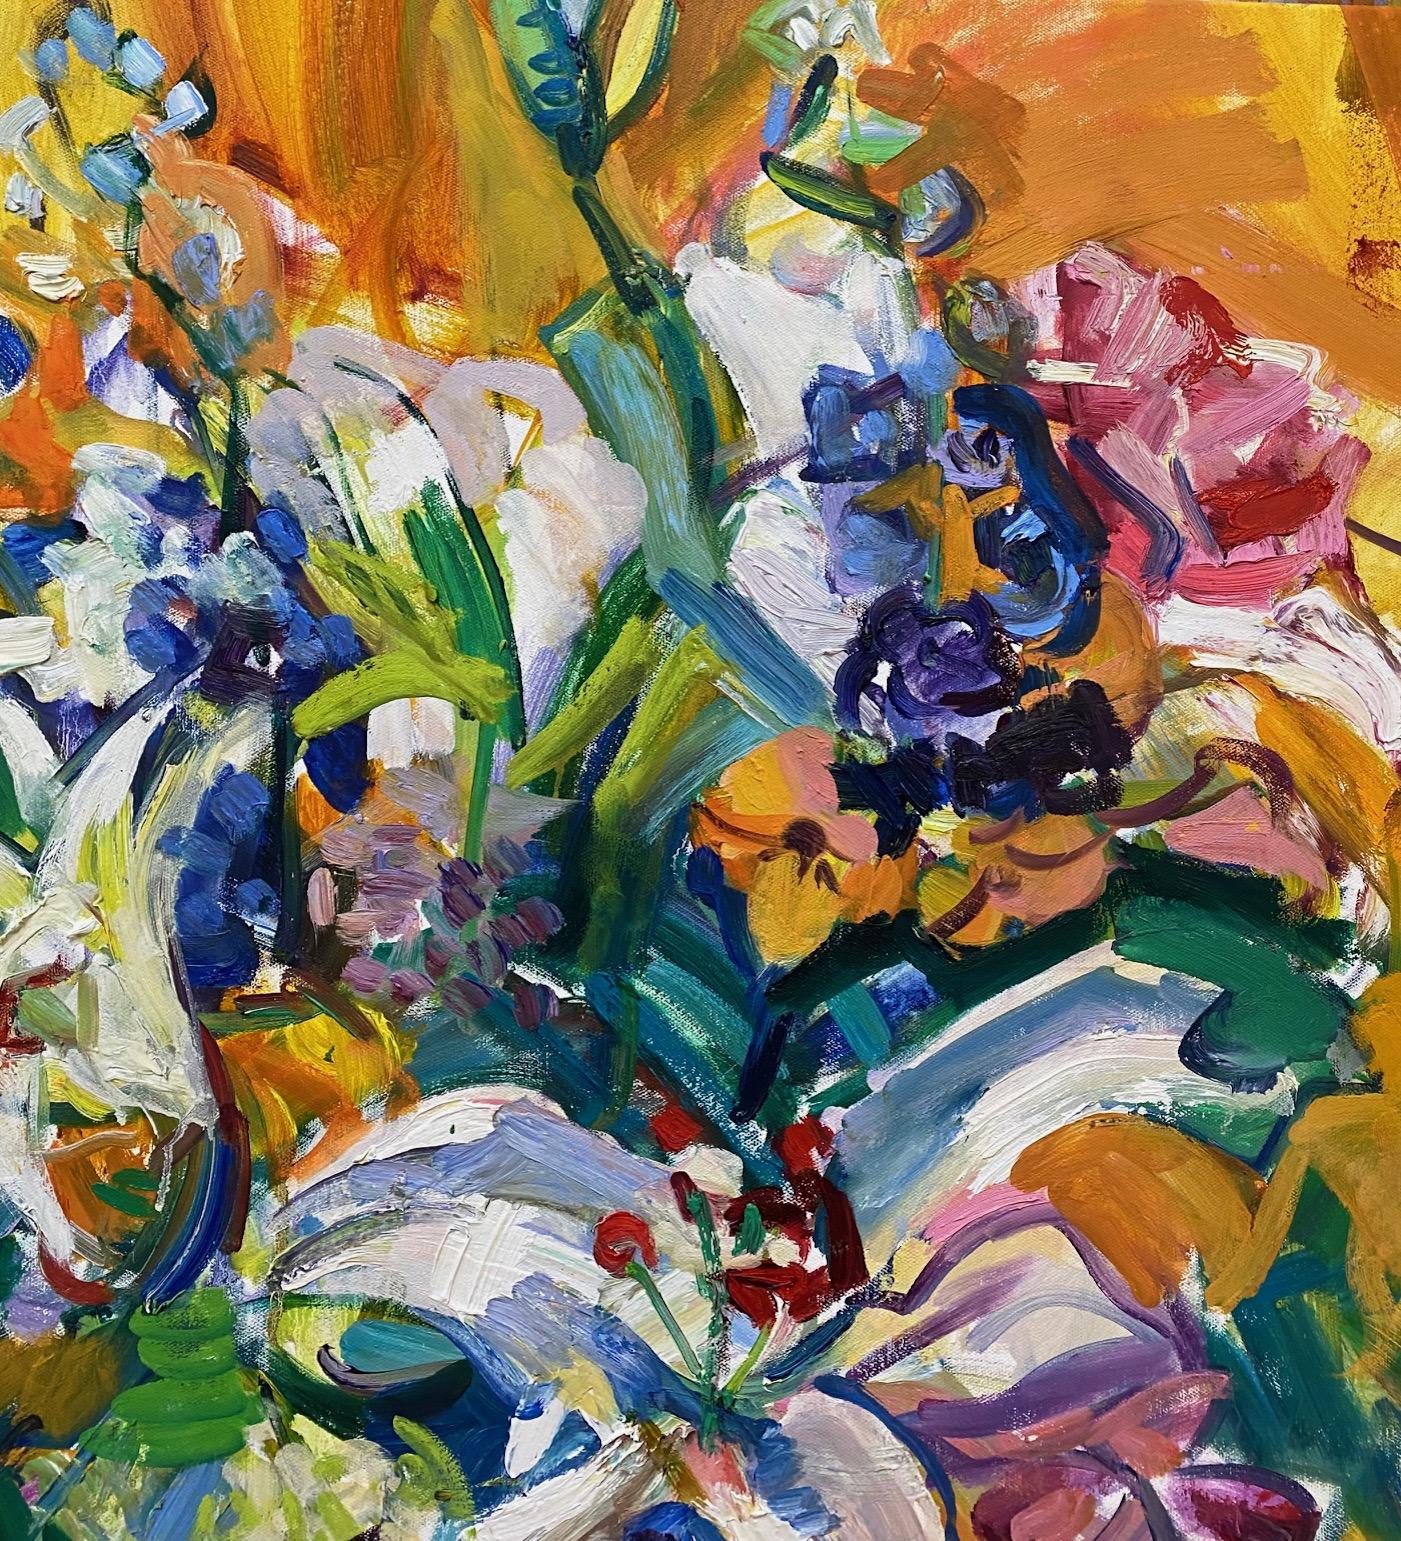 Flowers in a Vase, original 42 x 33 abstract expressionist floral still life - Abstract Expressionist Painting by Sonia Grineva